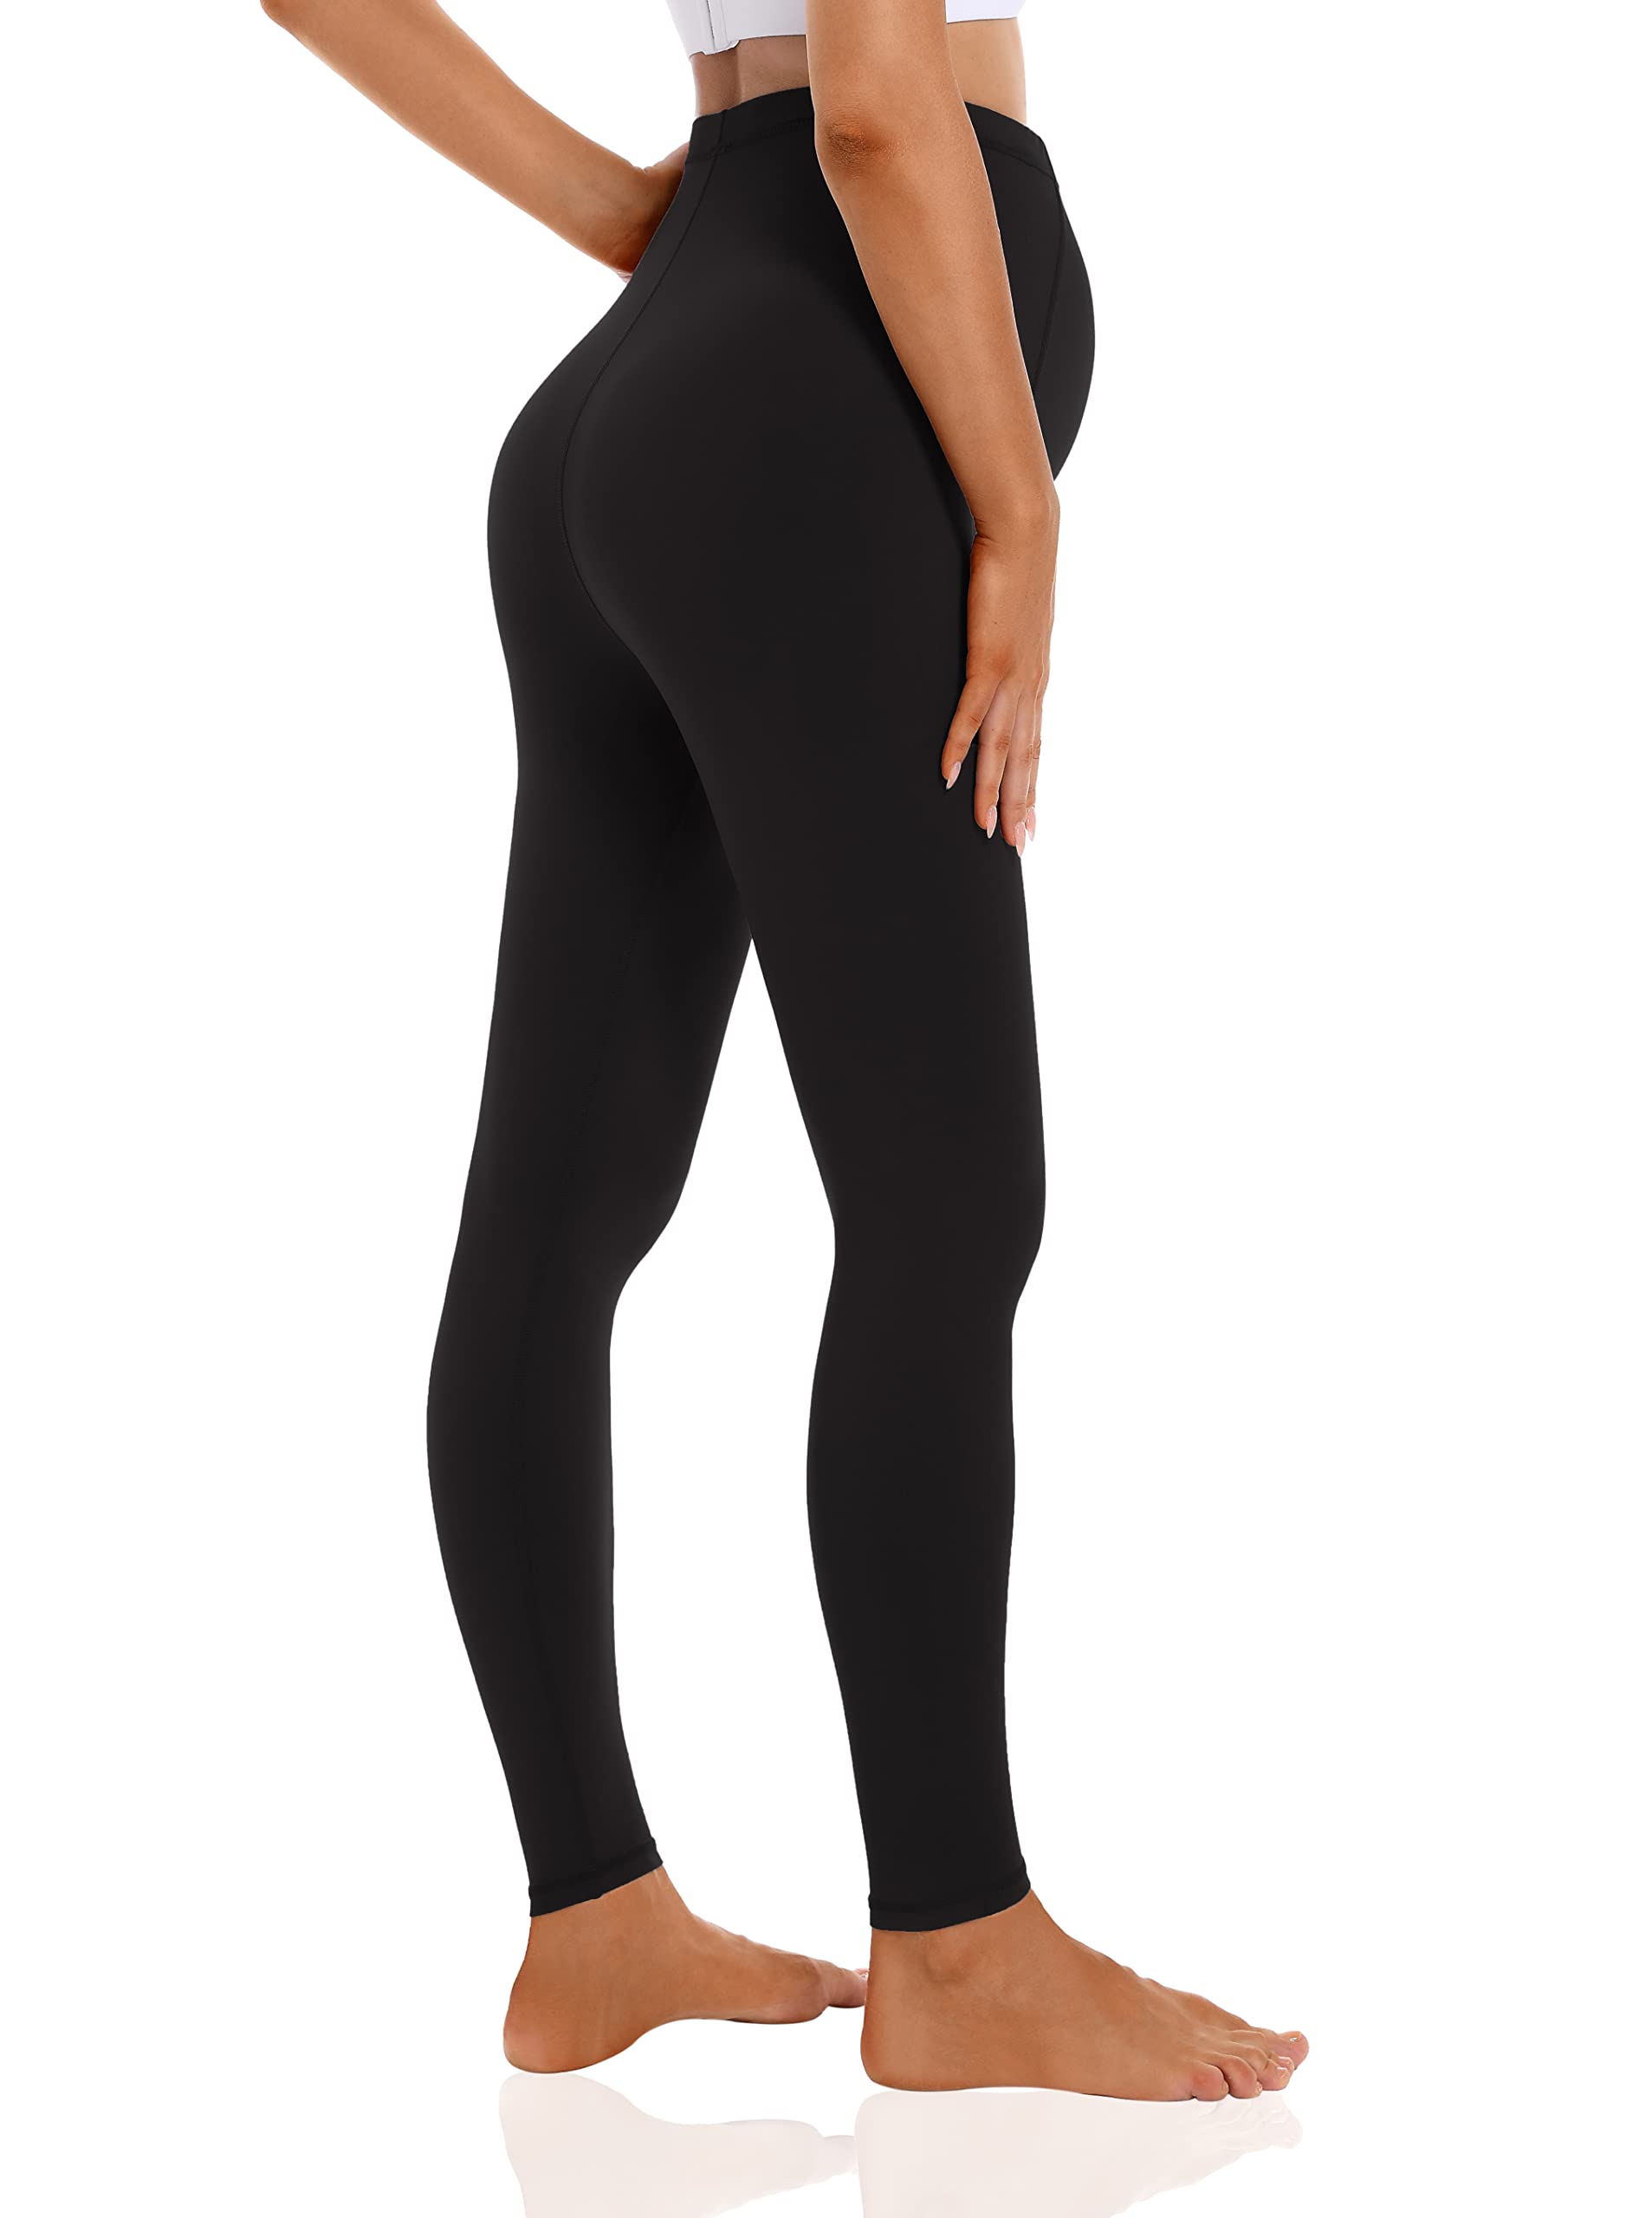 Foucome Women's Maternity Leggings Over The Belly Pregnancy Active